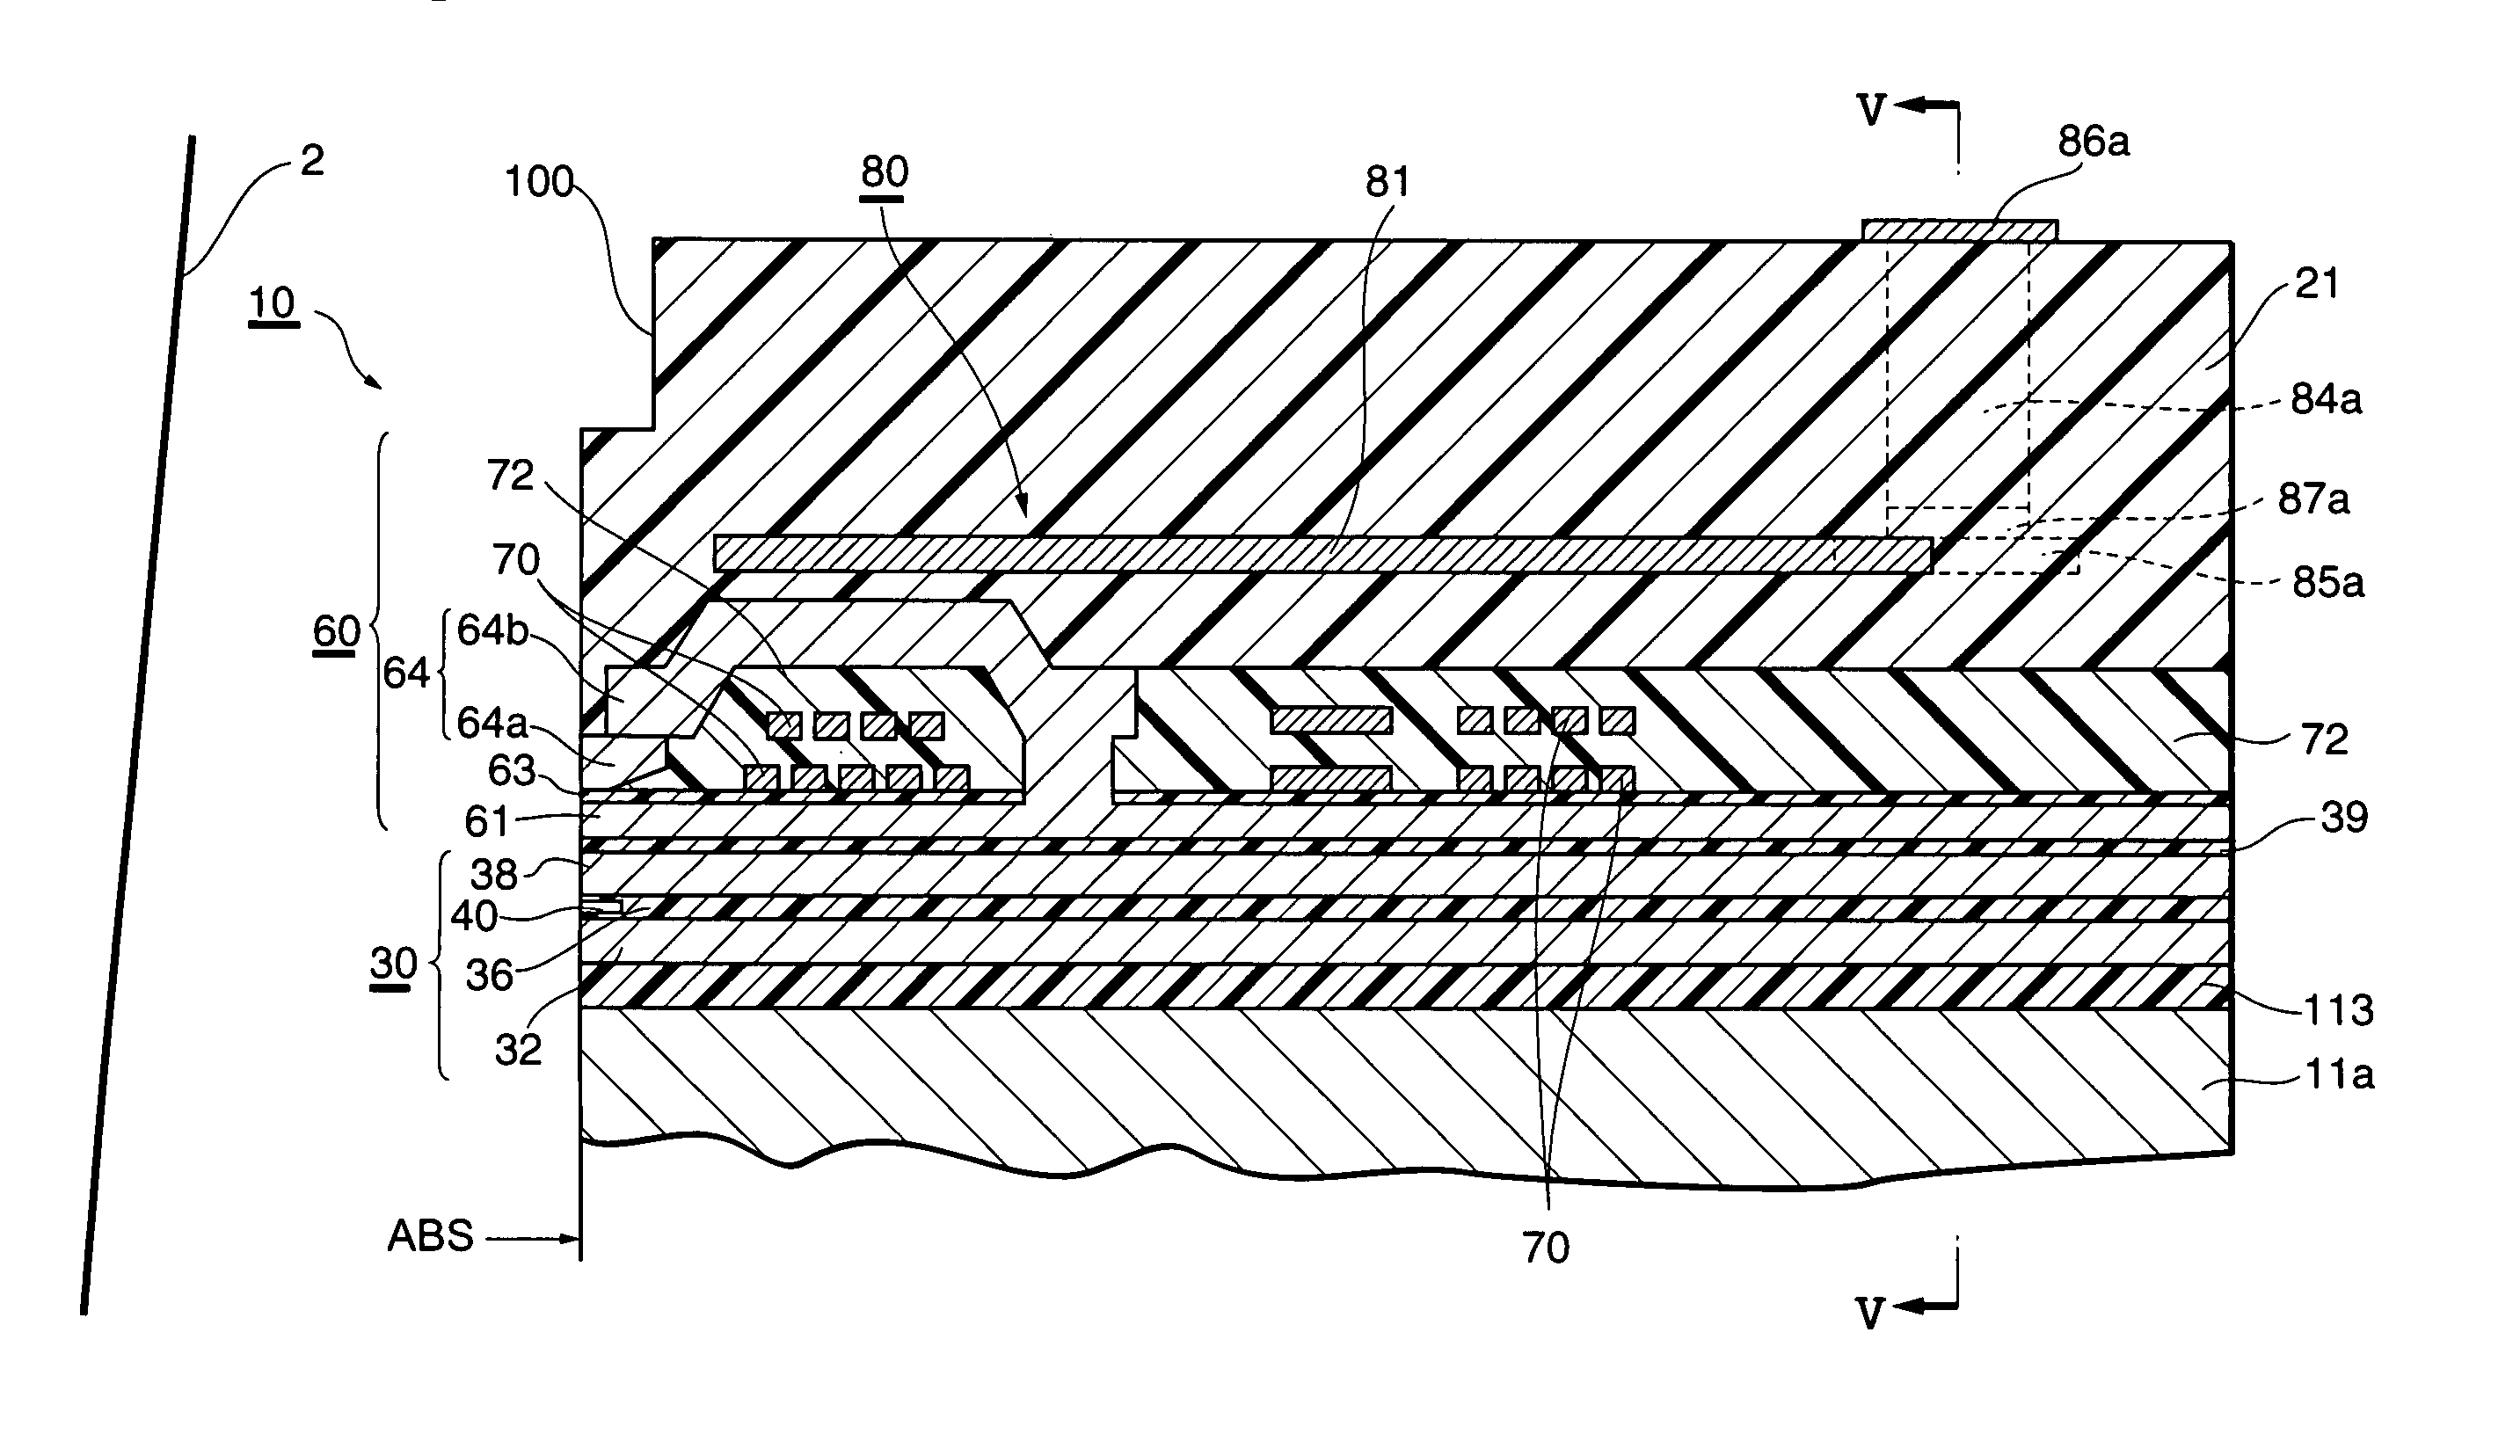 Thin-film magnetic head, head gimbal assembly, and hard disk drive incorporating a heater